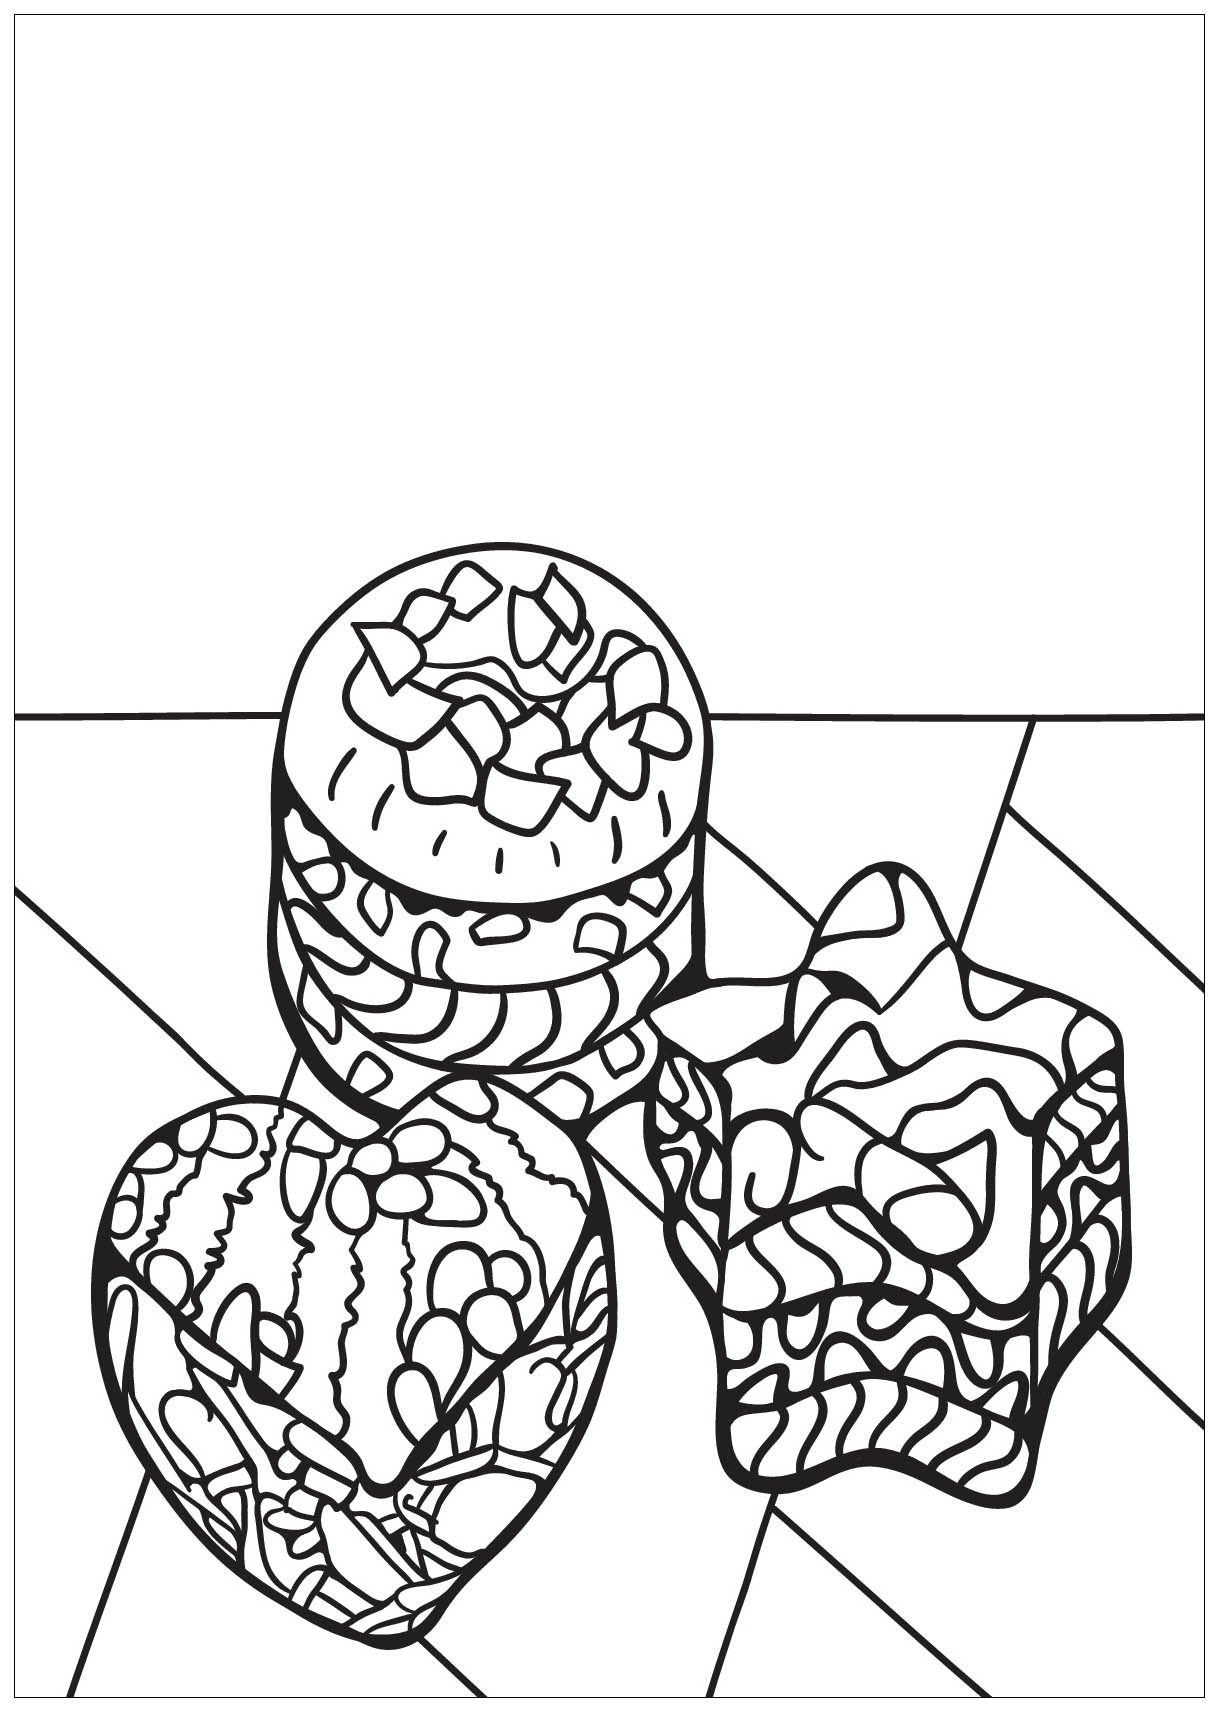 Free book cupcake 9 - Cupcakes Adult Coloring Pages